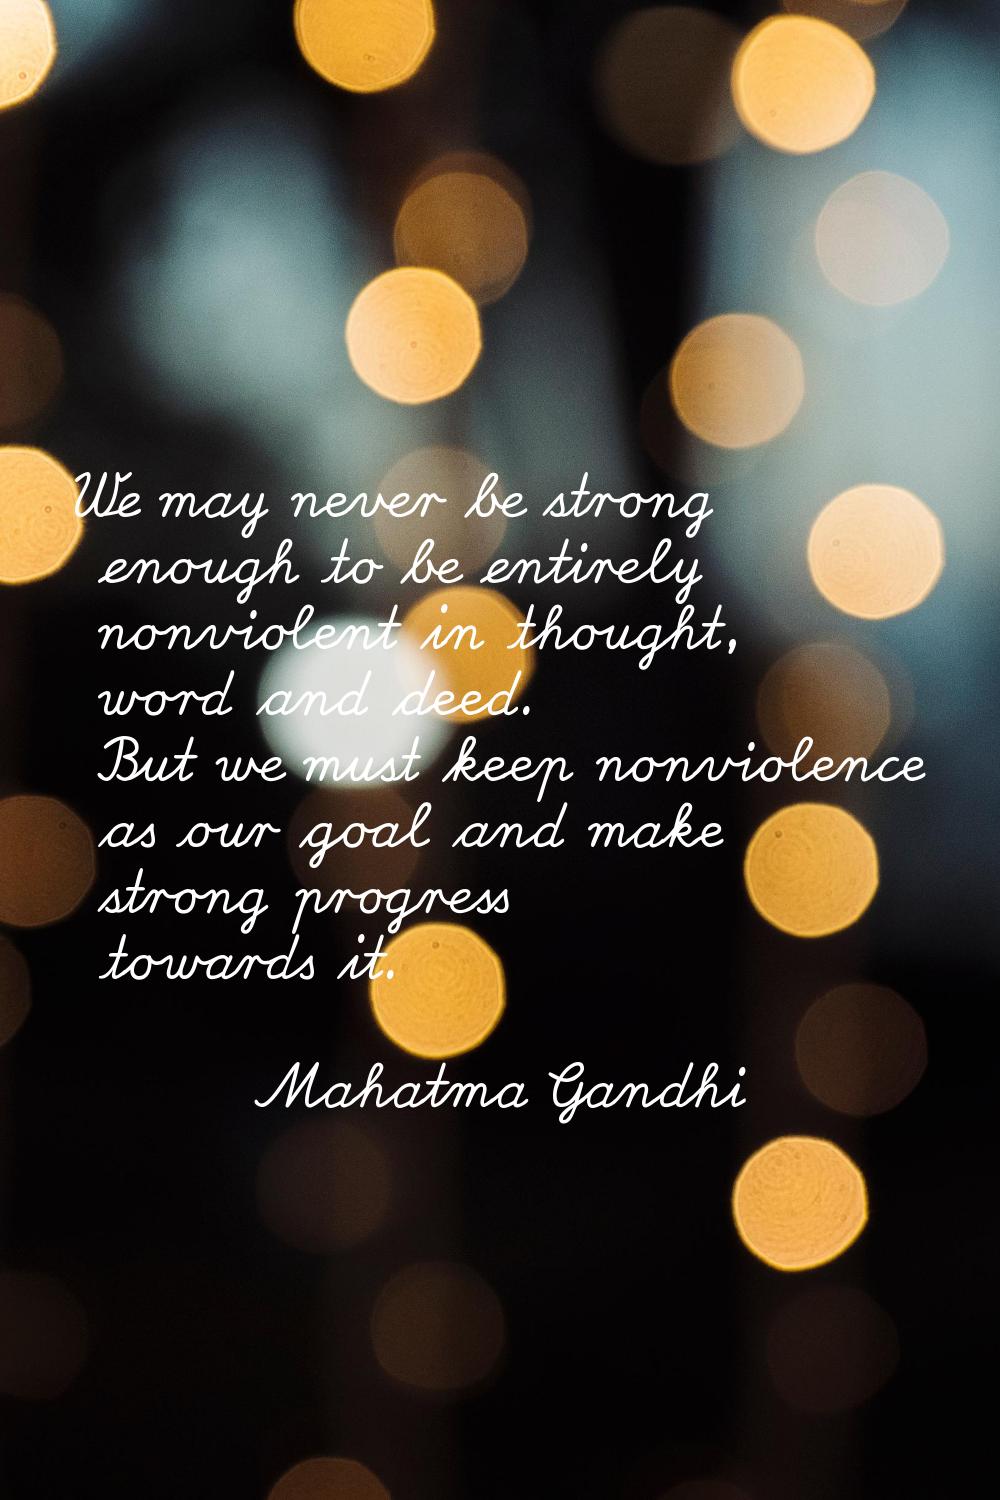 We may never be strong enough to be entirely nonviolent in thought, word and deed. But we must keep